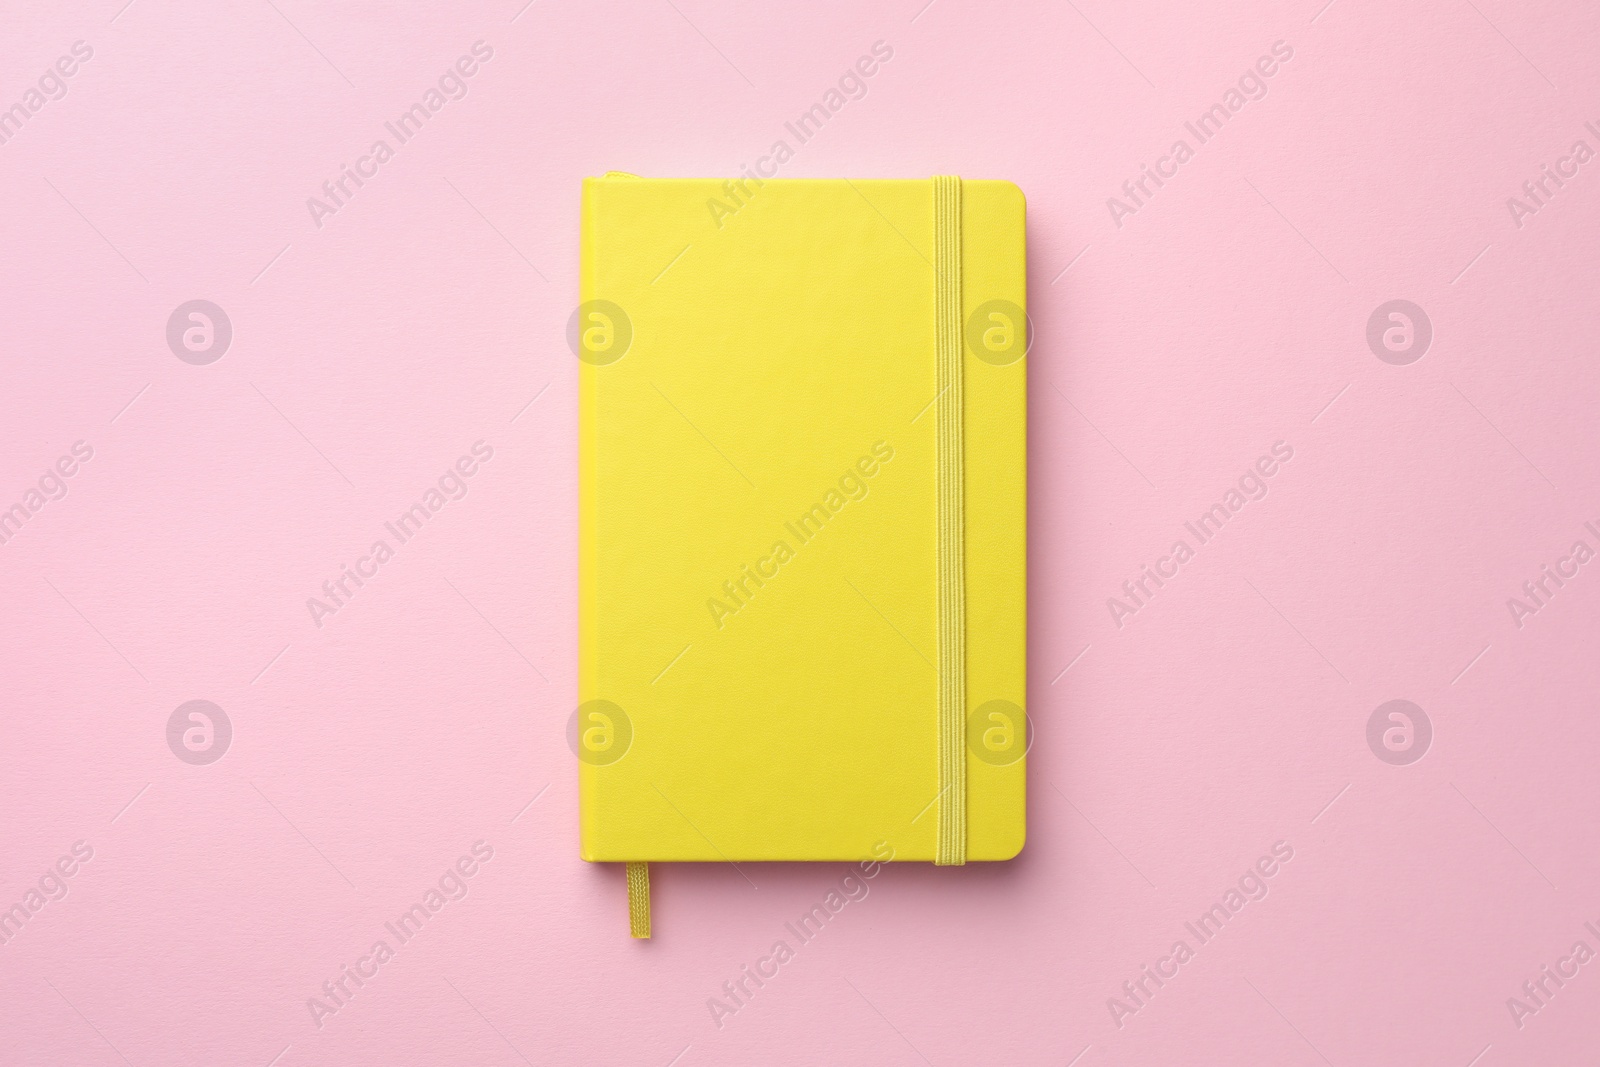 Photo of Closed yellow notebook on light pink background, top view